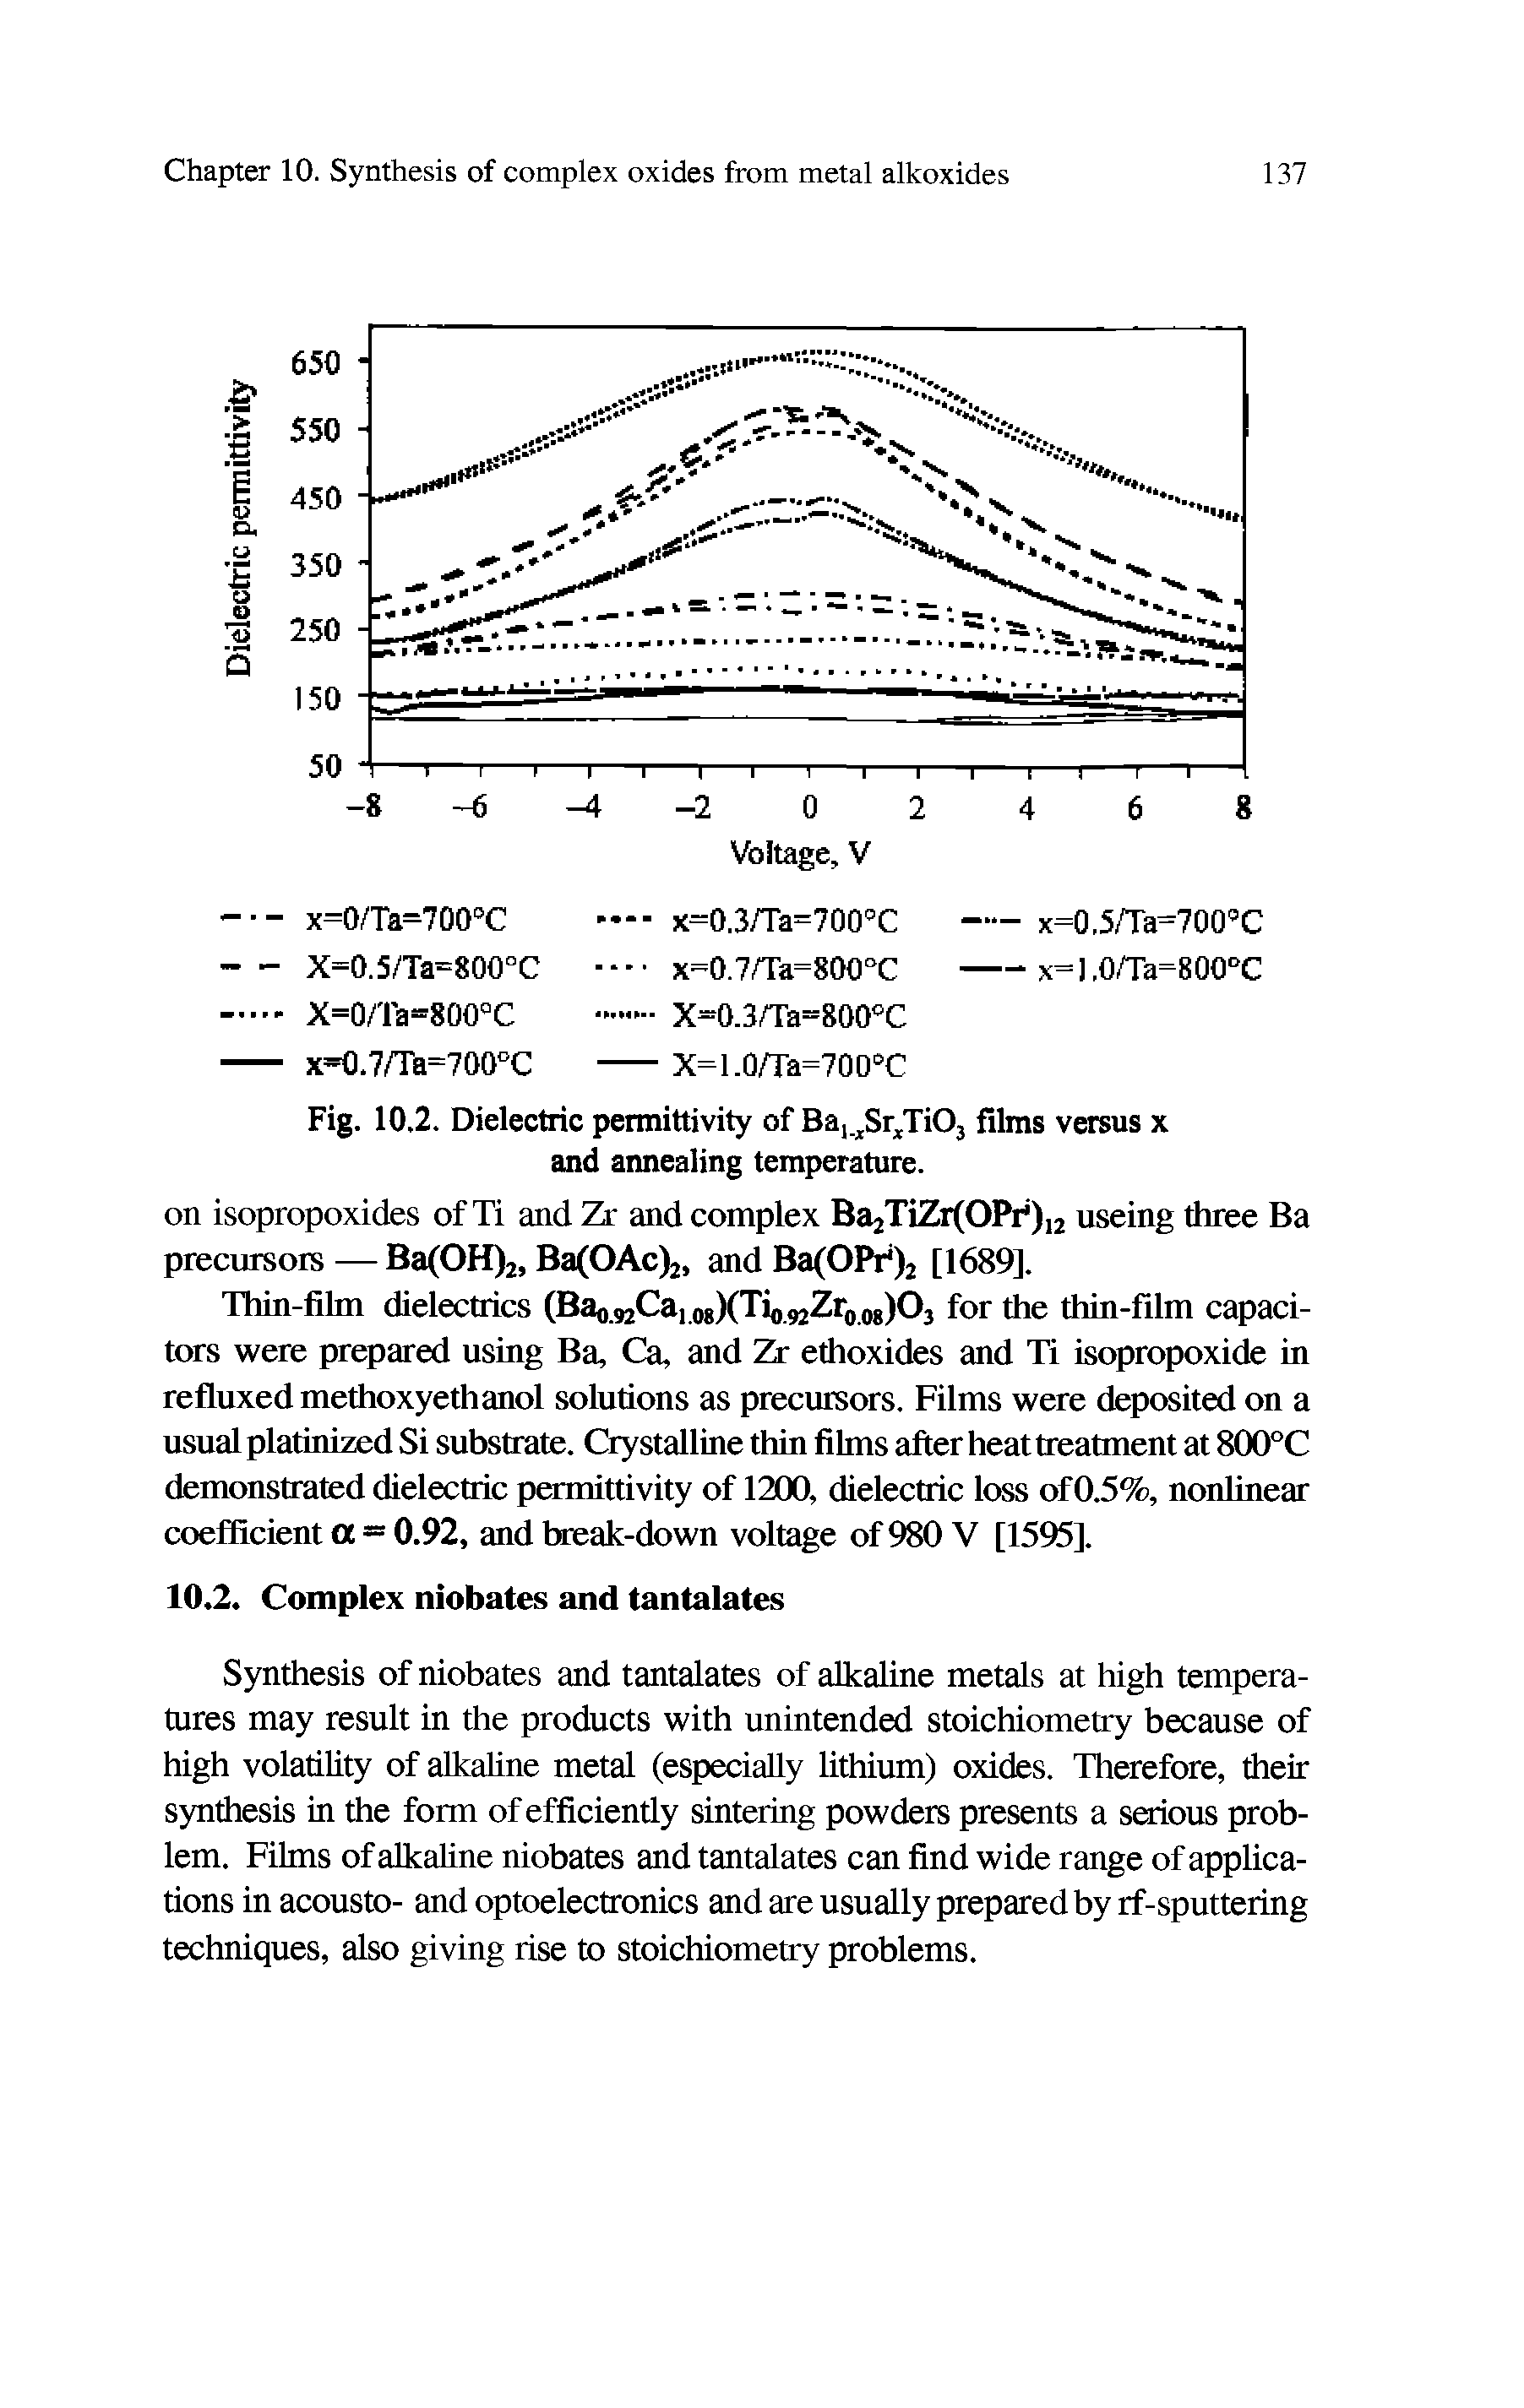 Fig. 10.2. Dielectric permittivity of Ba Sr/TiOj films versus x and annealing temperature.